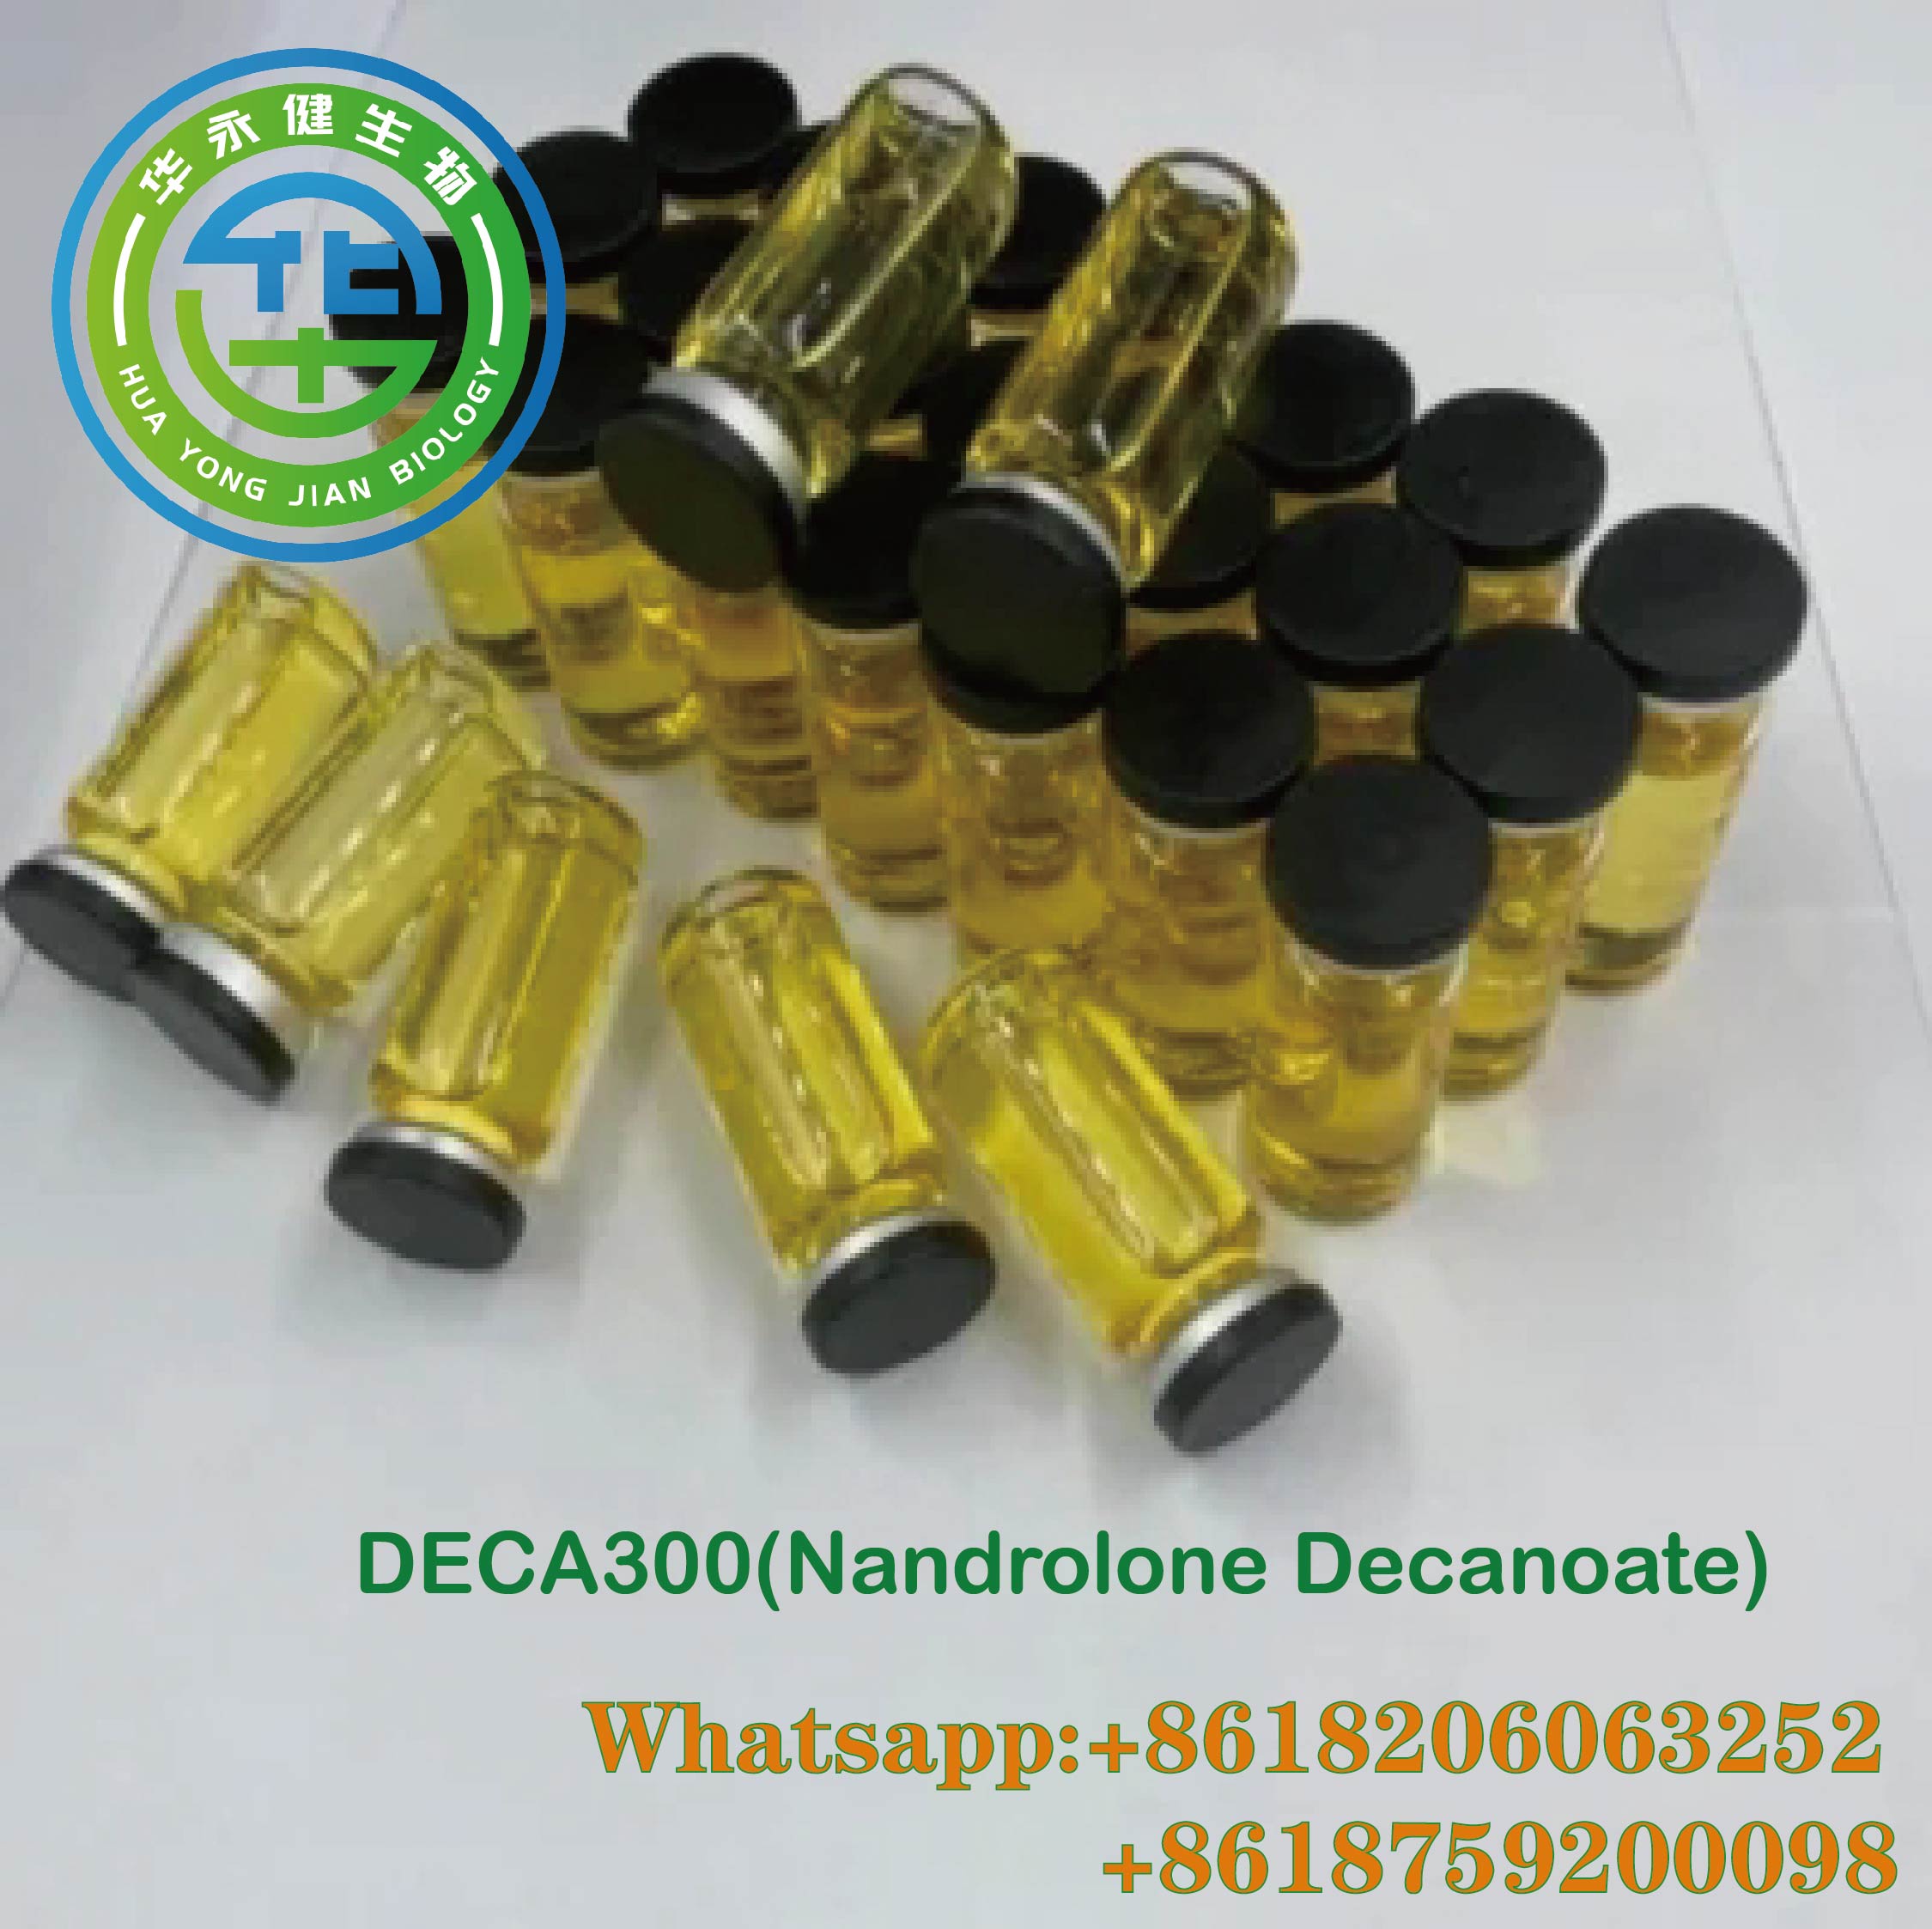 Synthetic Injectable Anabolic Steroids DECA300 300 Mg/Ml Yellow Color Oil Nandrolone Decanoate 300 Featured Image